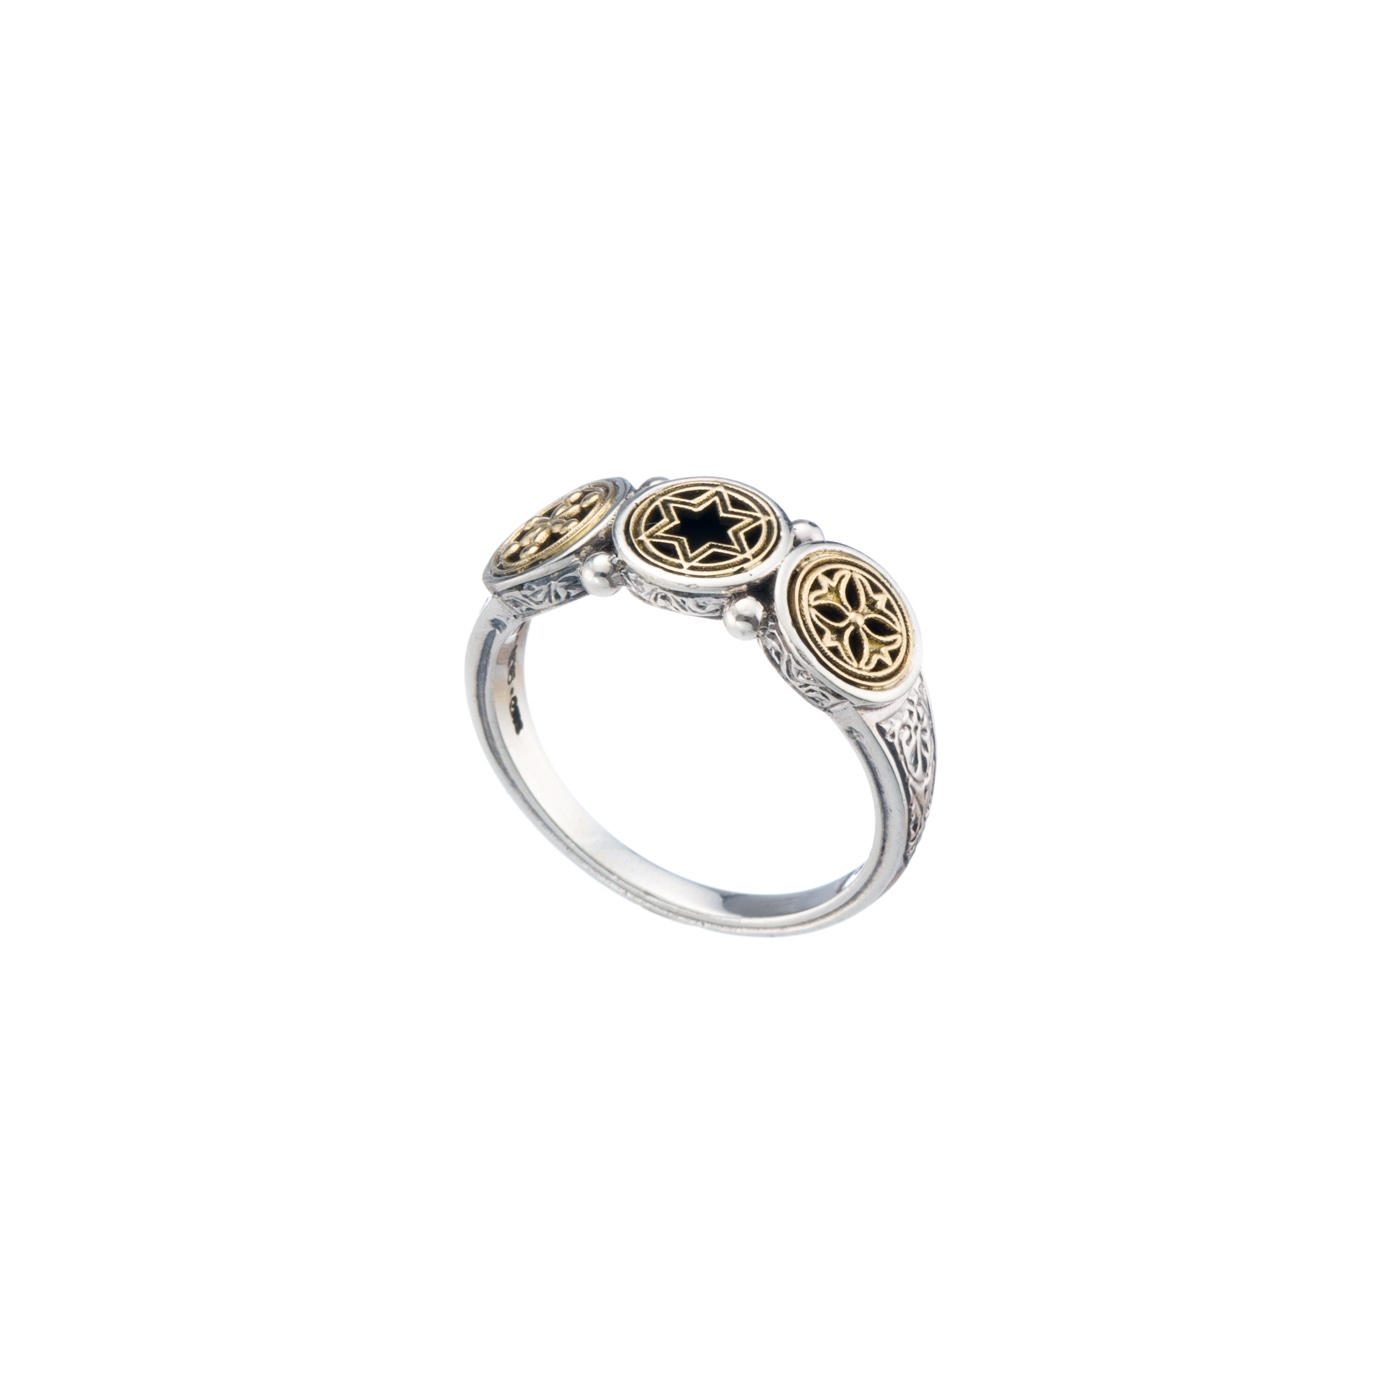 Symbol Star of David ring in 18K Gold and Sterling silver